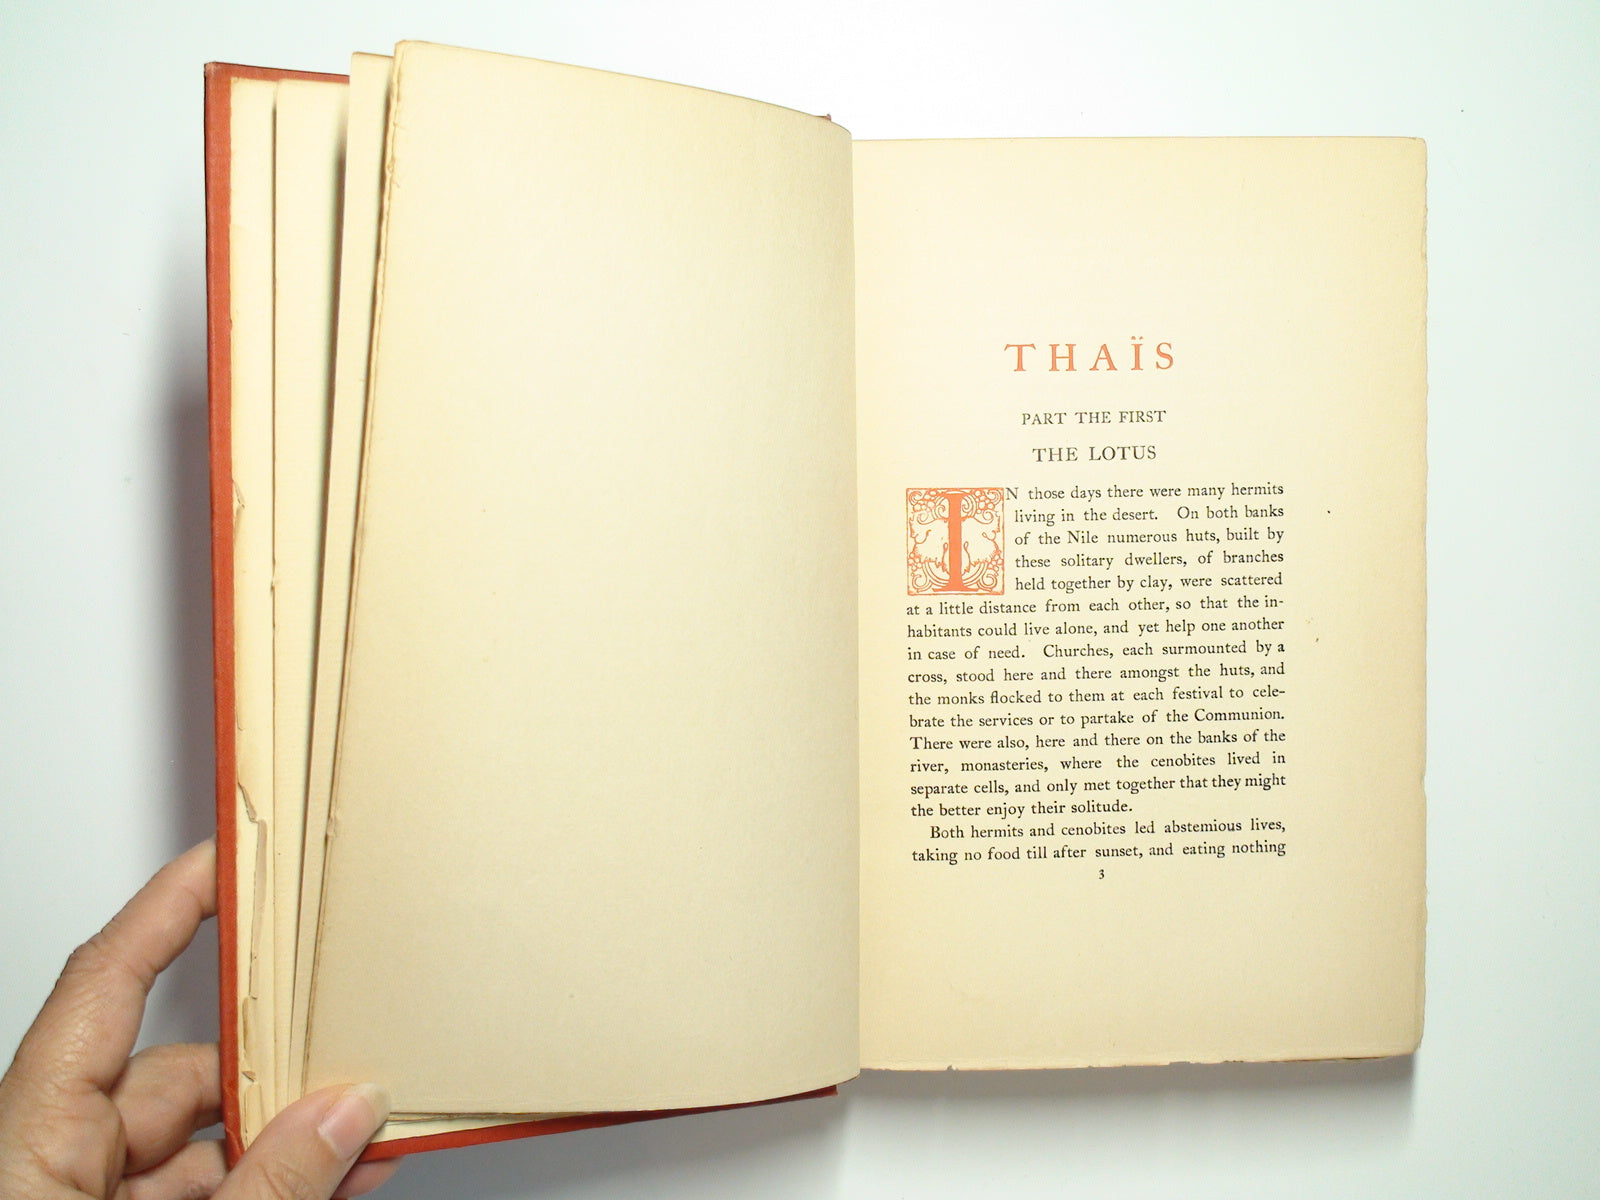 Thais by Anatole France, Translated by Robert B. Douglas, 1909